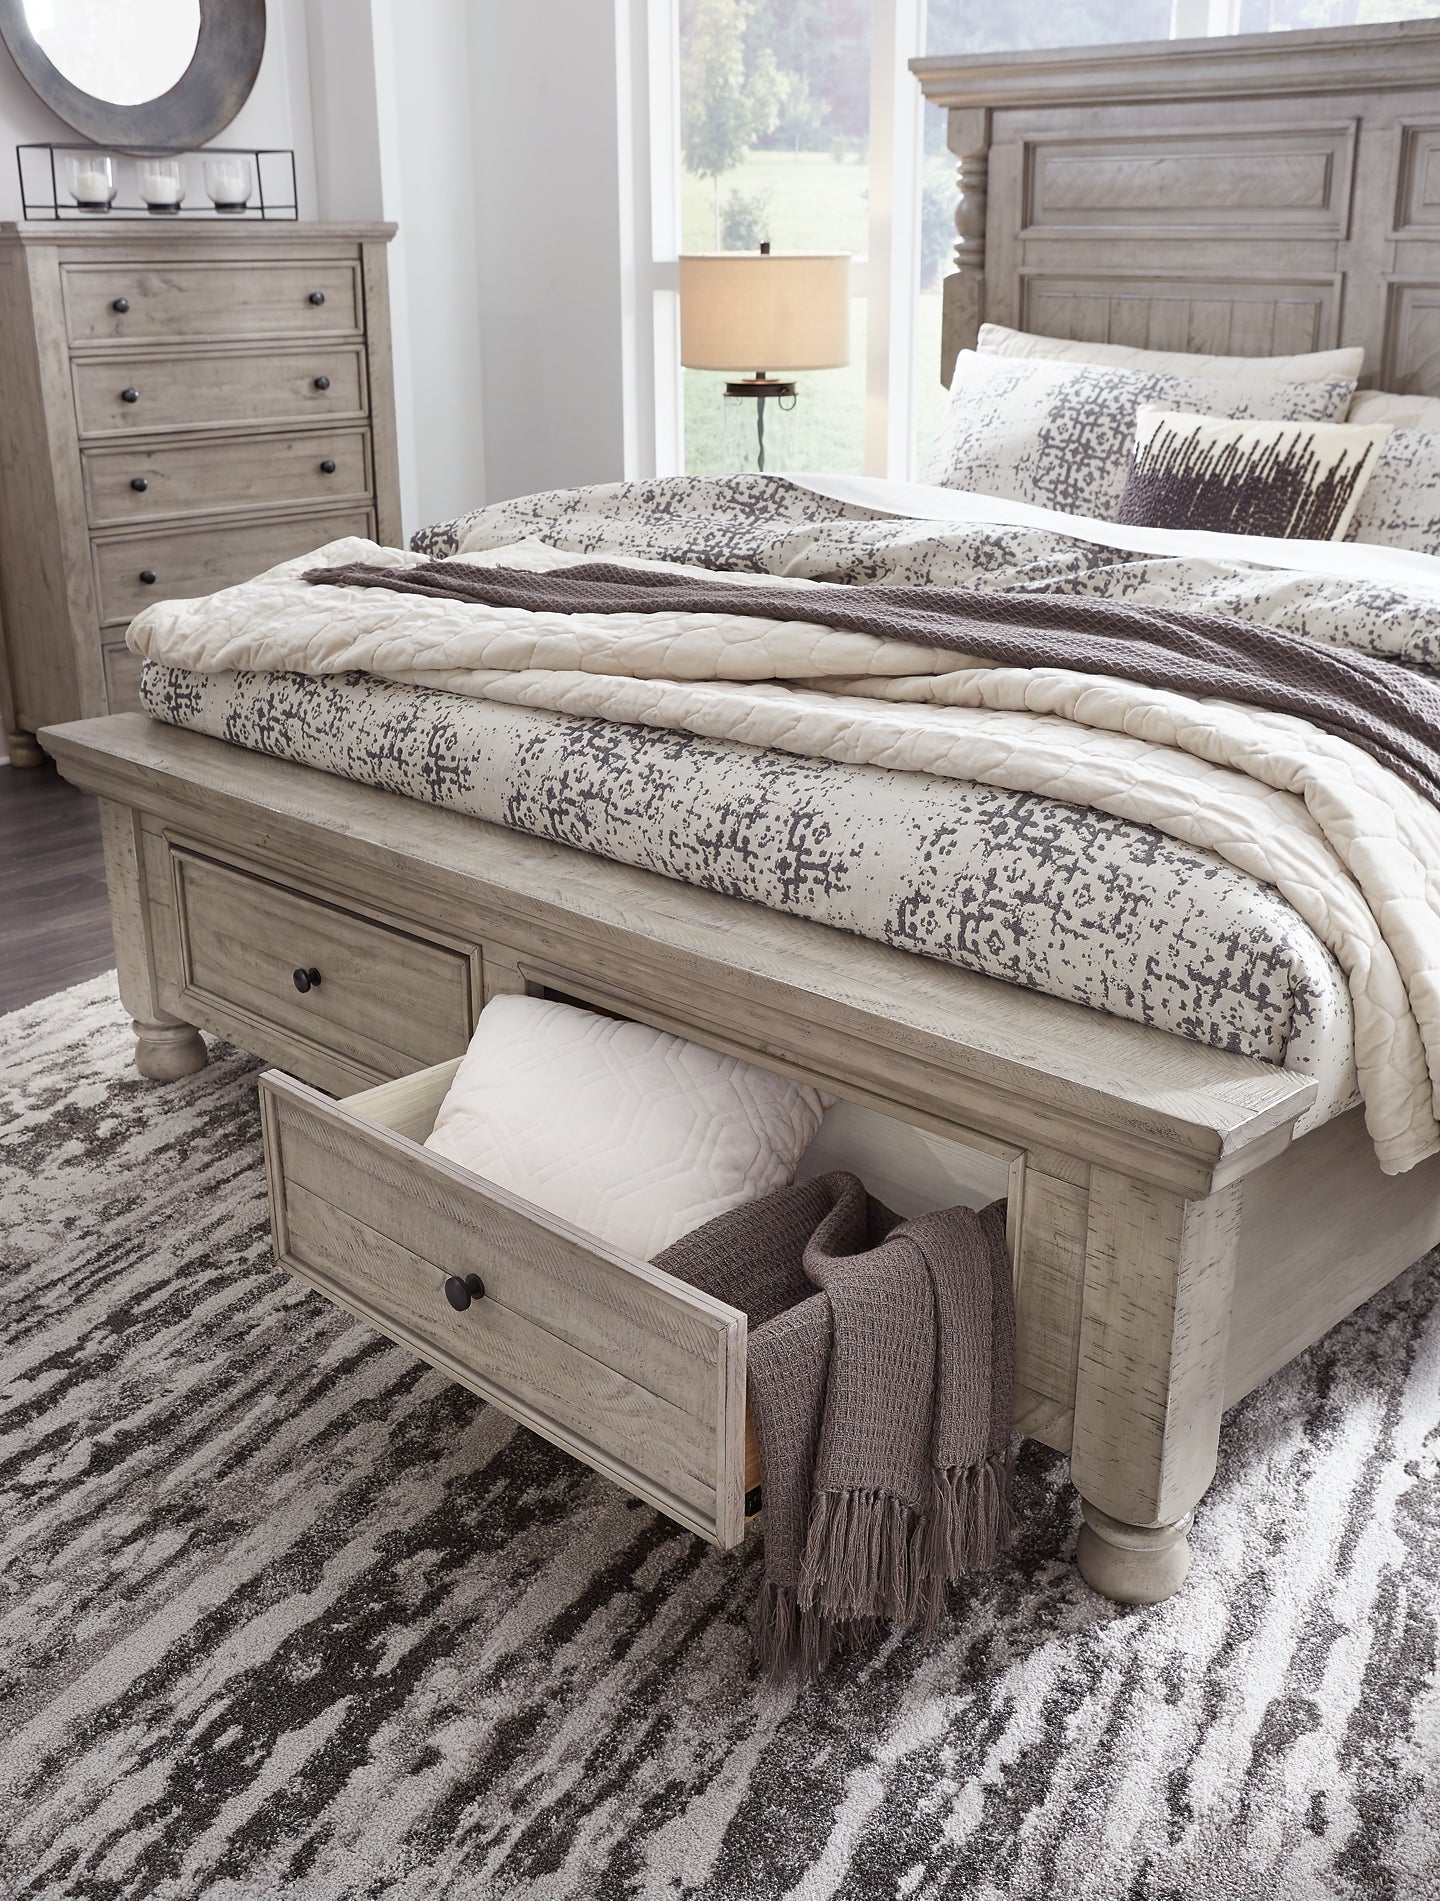 Harrastone California King Panel Bed with Mirrored Dresser and Chest